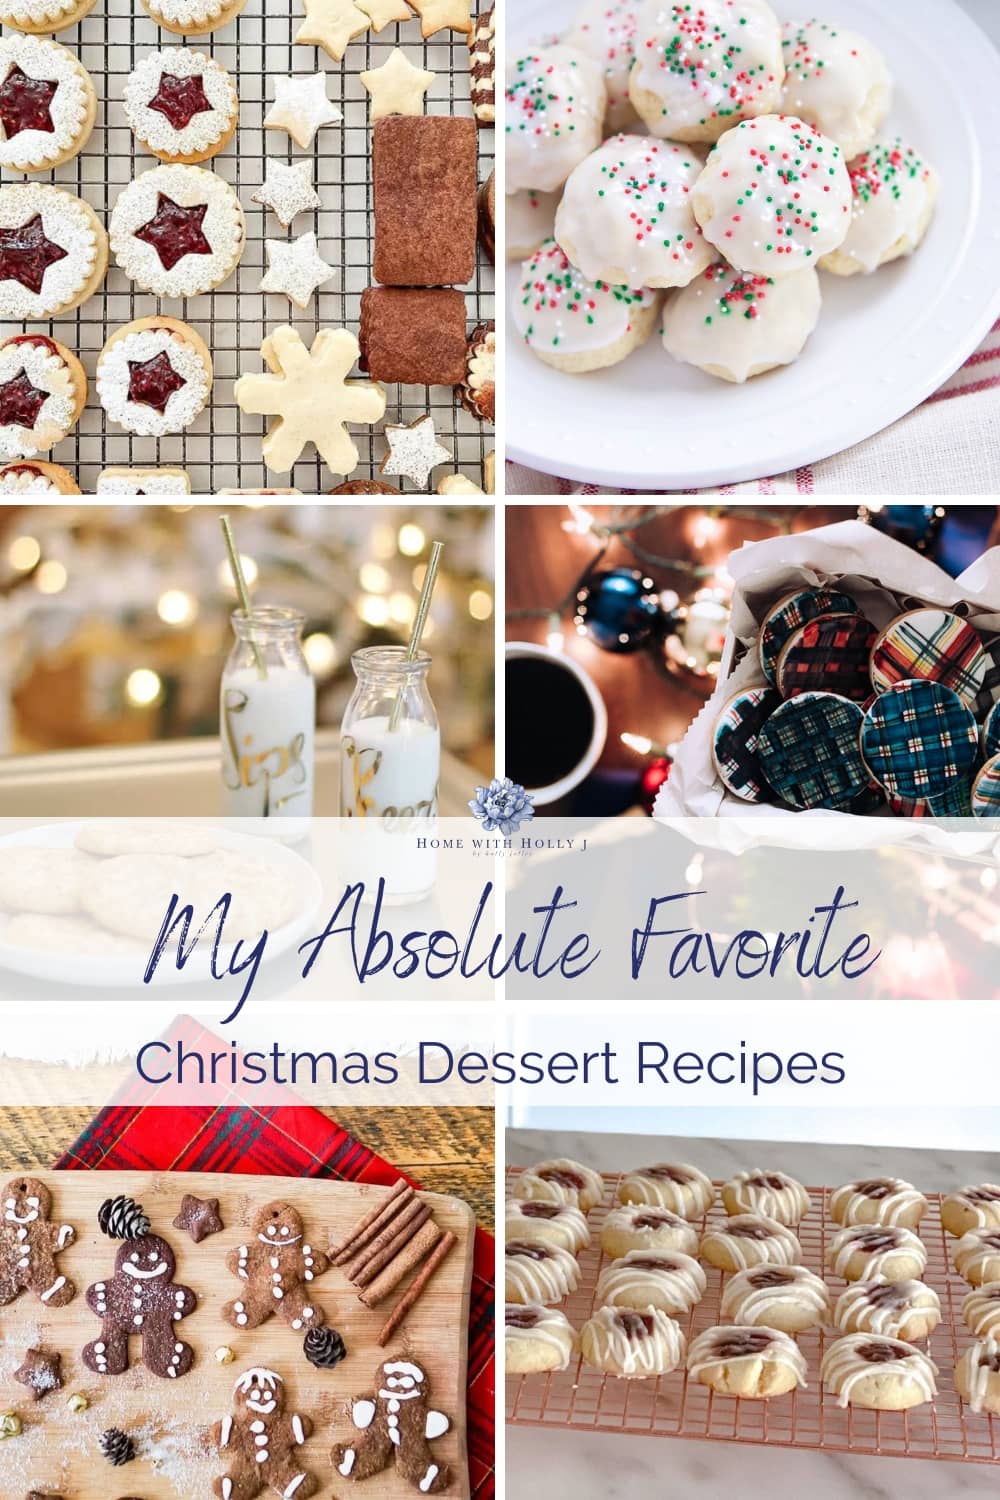 Looking for the perfect Christmas dessert recipe to add to your baking list this year? Here are a few of my favorite recipes.